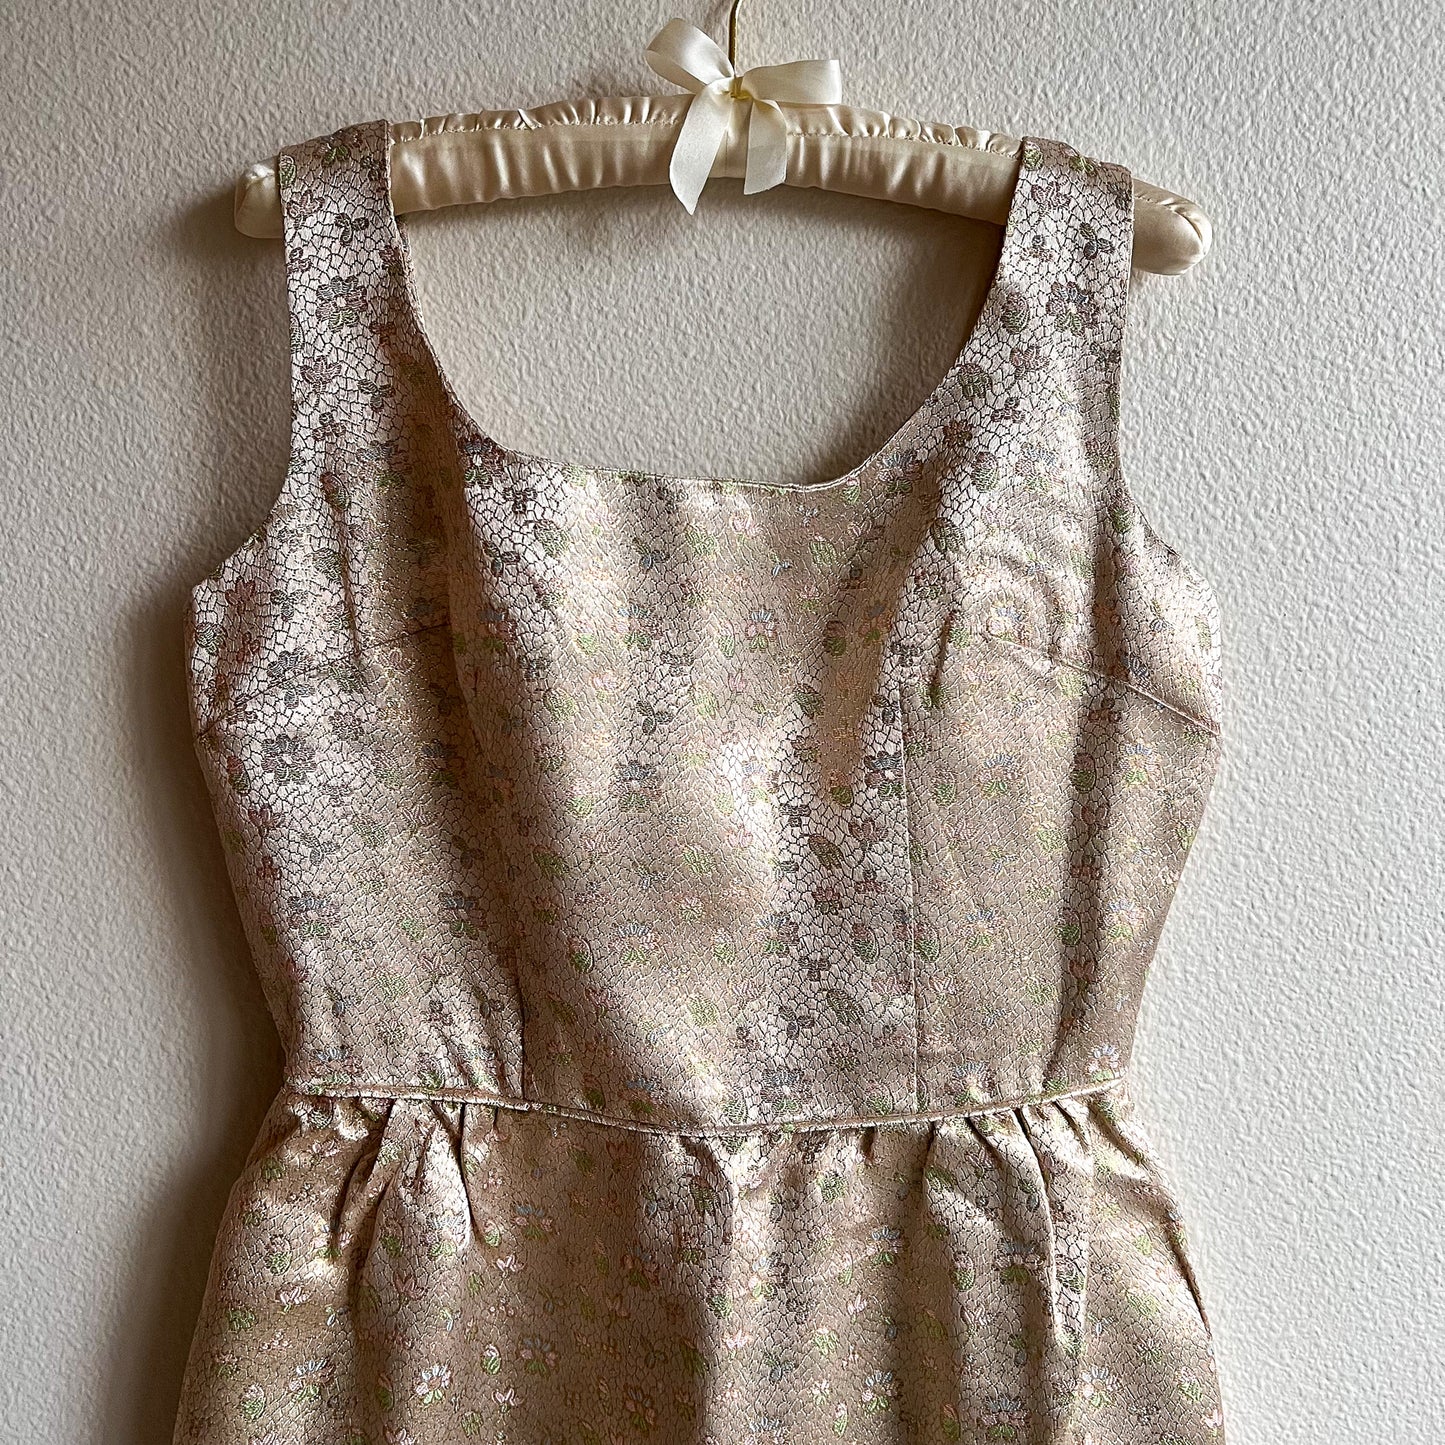 Charming 1960s Metallic Dainty Floral Party Dress (M)